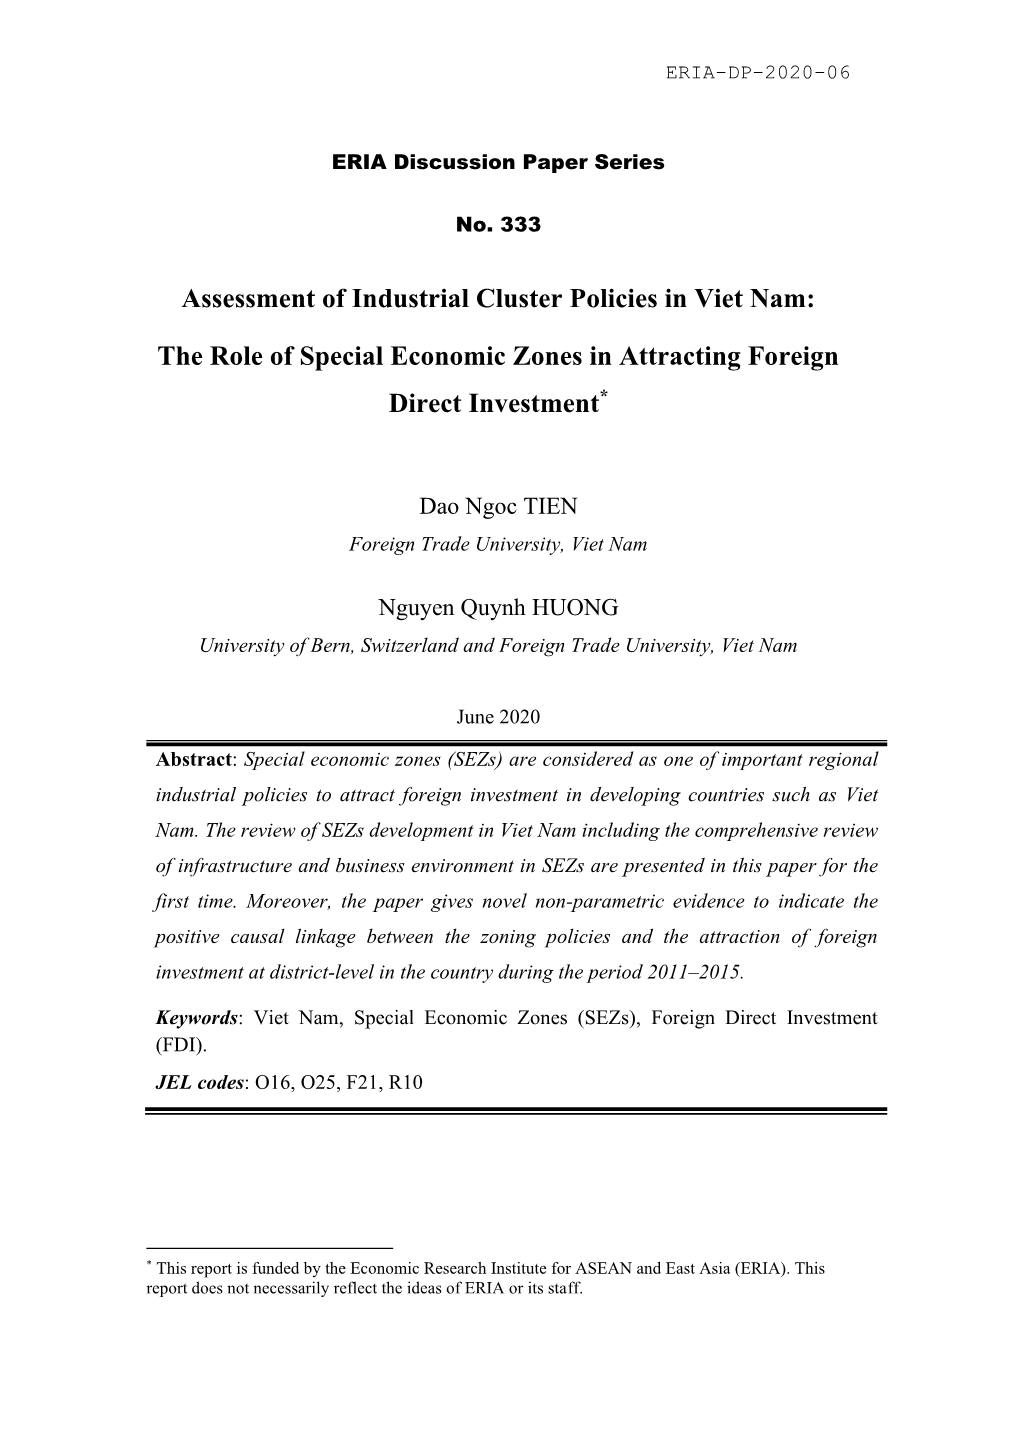 Assessment of Industrial Cluster Policies in Viet Nam: the Role Of